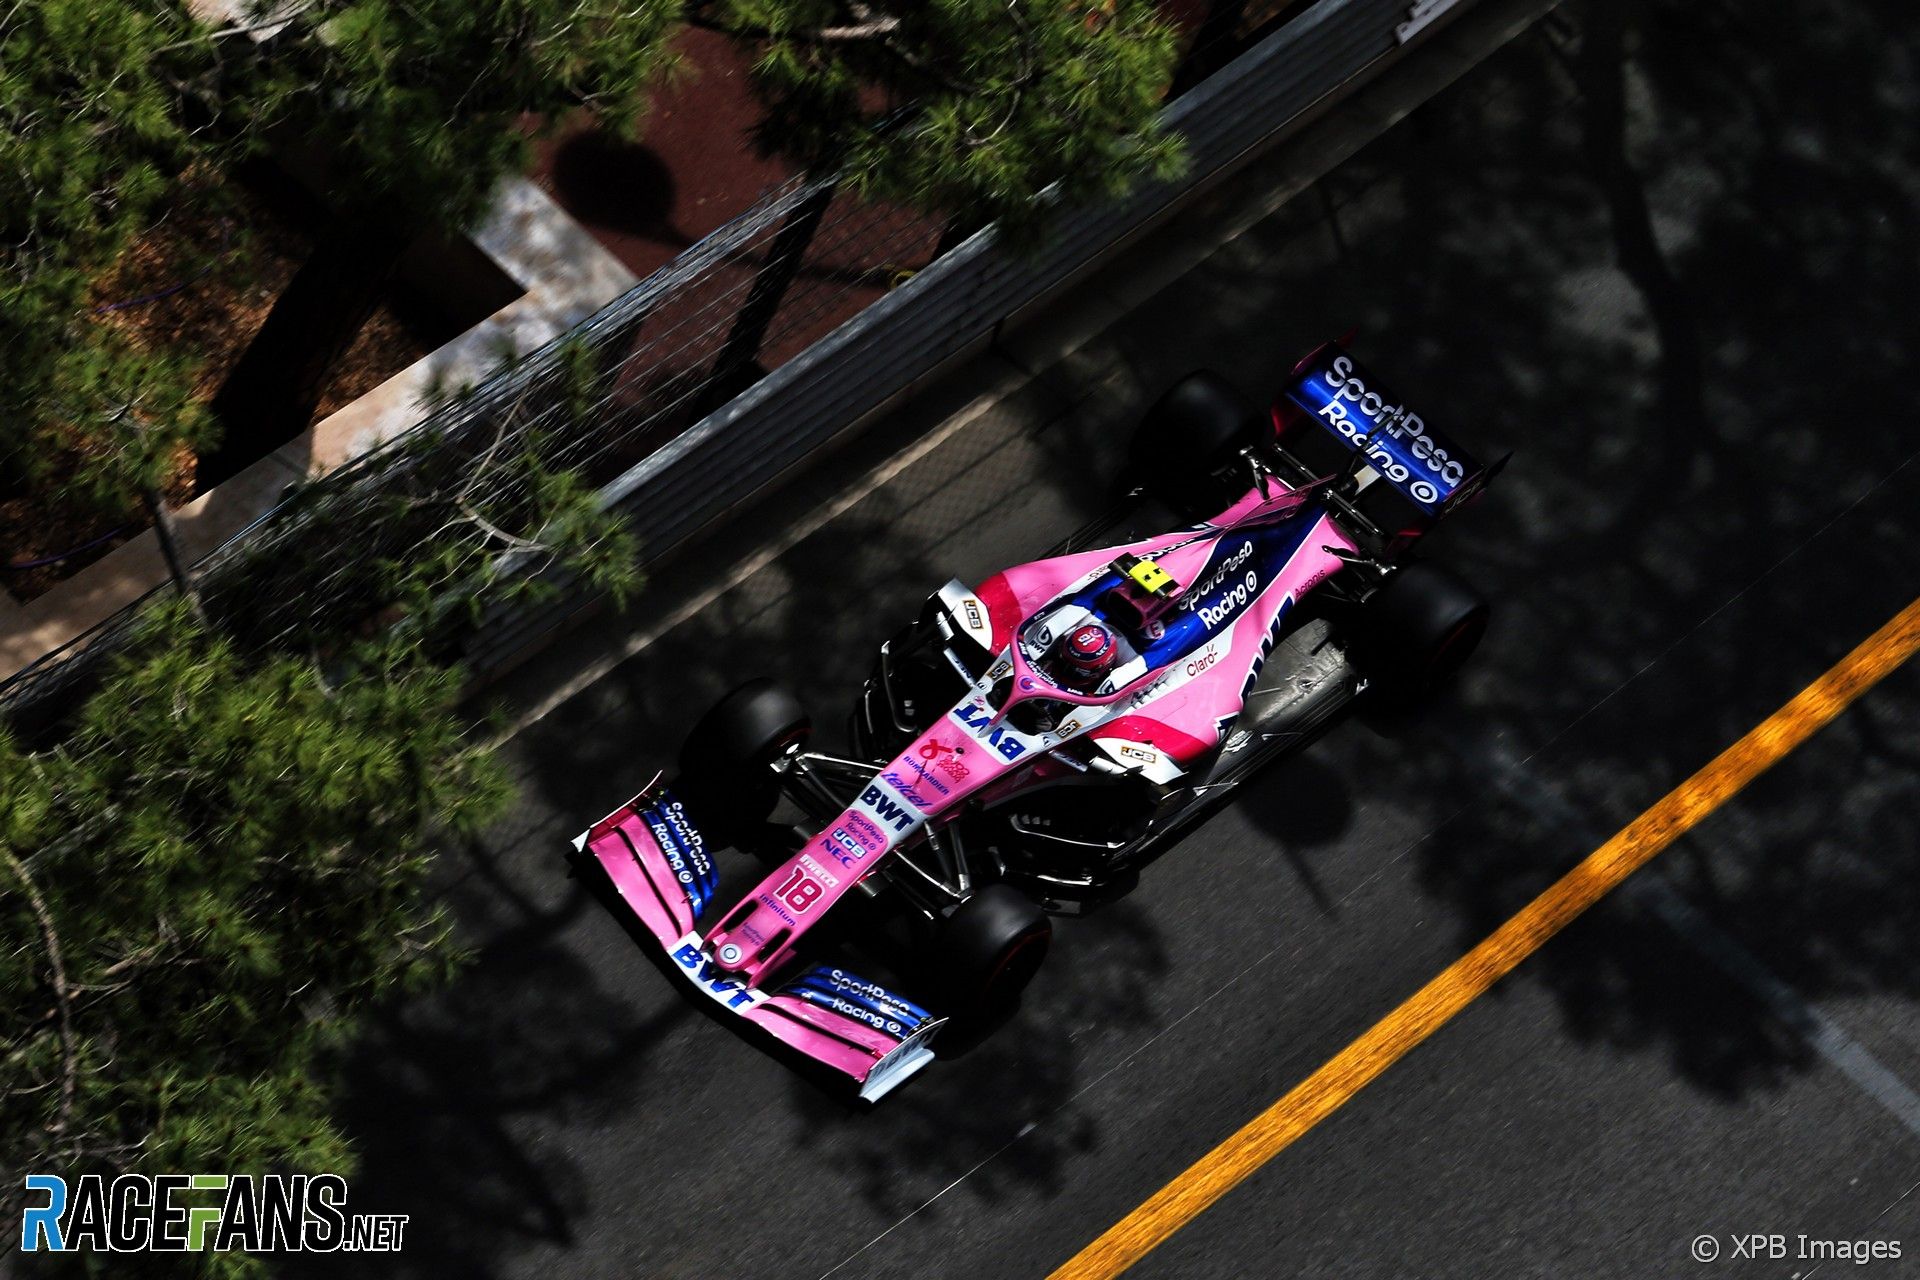 Lance Stroll, SportPesa Racing Point F1 Team, RP19. Marco's